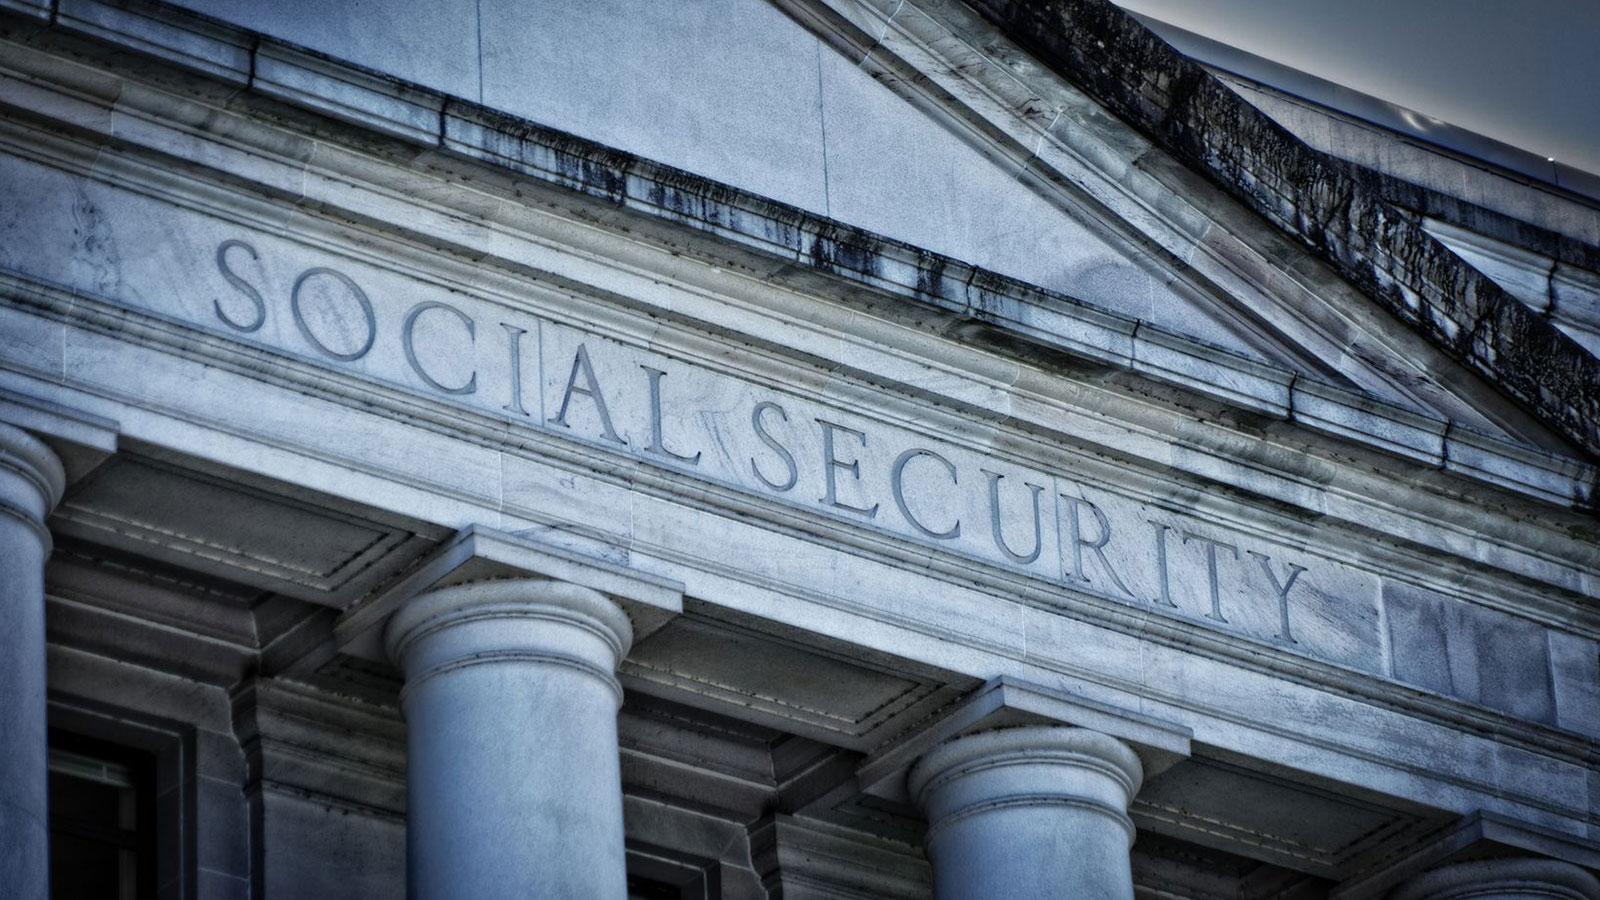 Yes, the debt ceiling threatens Social Security. Here’s how.